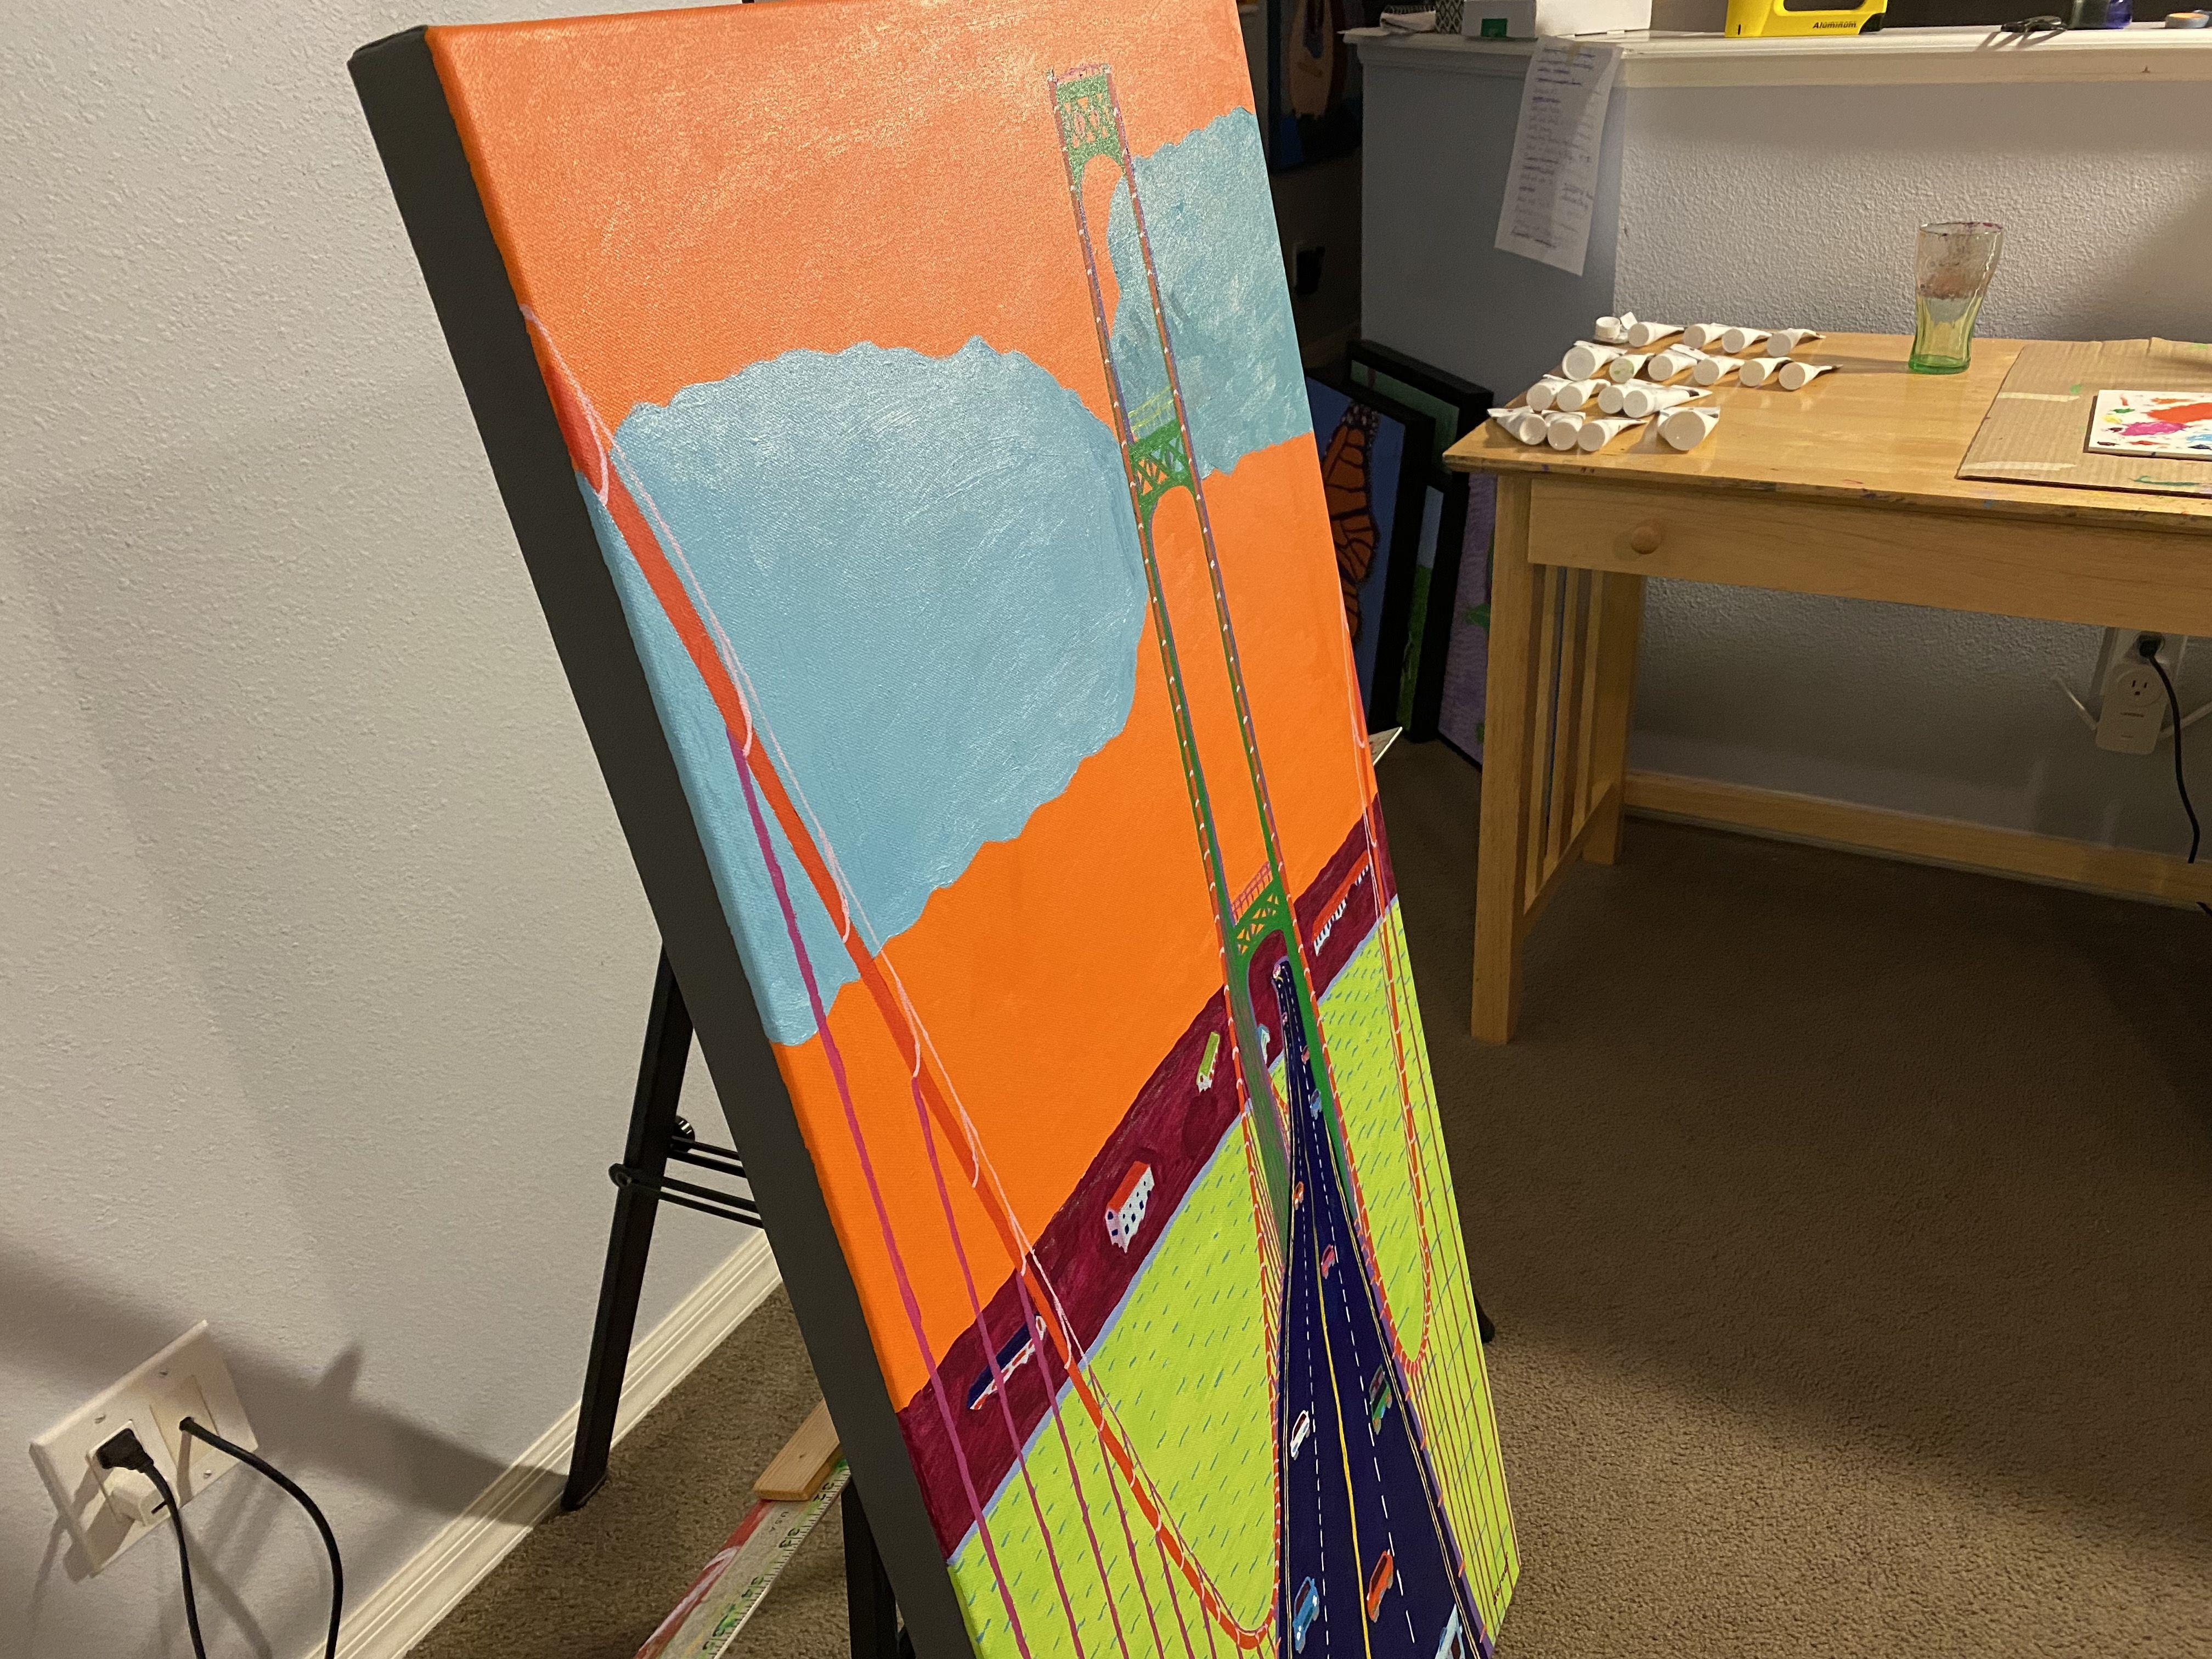   This is a vibrant acrylic Pop Art style painting of the beautiful Mackinac Bridge. This architectural masterpiece is a suspension bridge connecting the Upper and Lower peninsulas of the US state of Michigan. The length of the bridge with all its